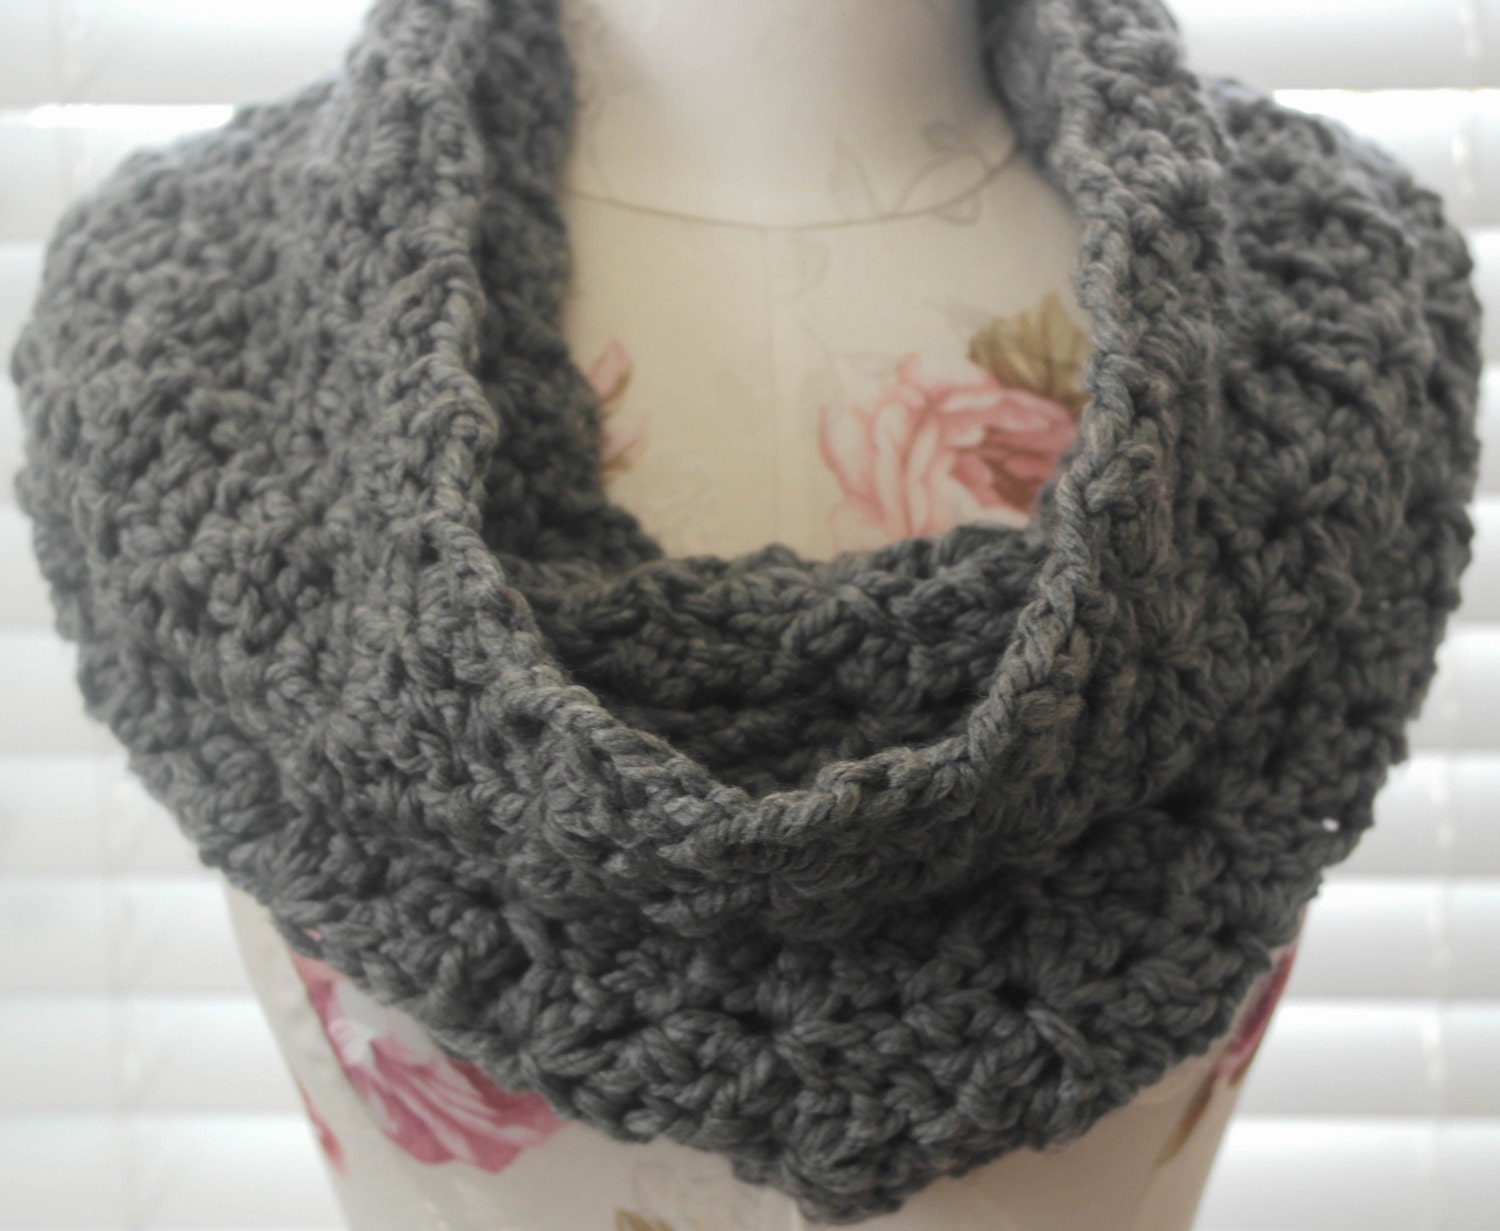 Super Soft and Thick Gray Cowl by WaltzDesignz on Etsy